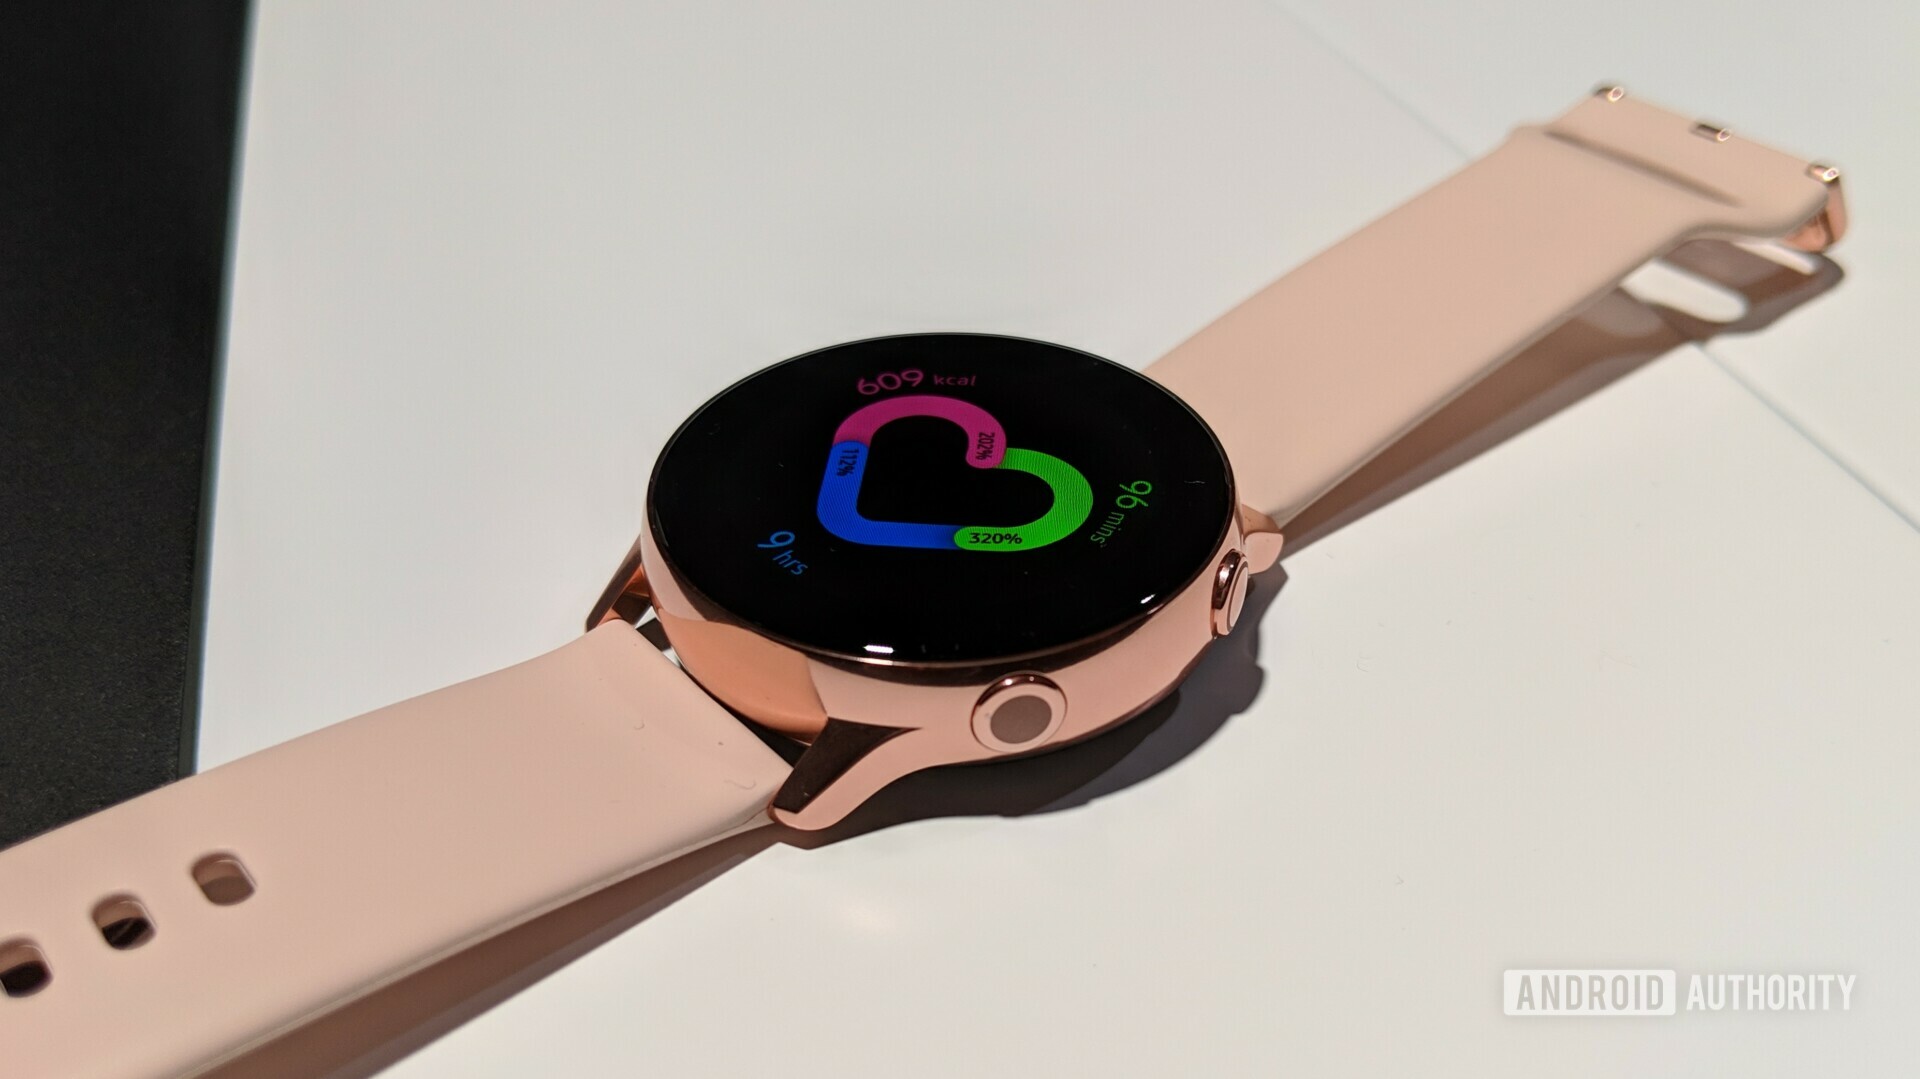 Photo of the Samsung Galaxy Watch Active placed on a table.